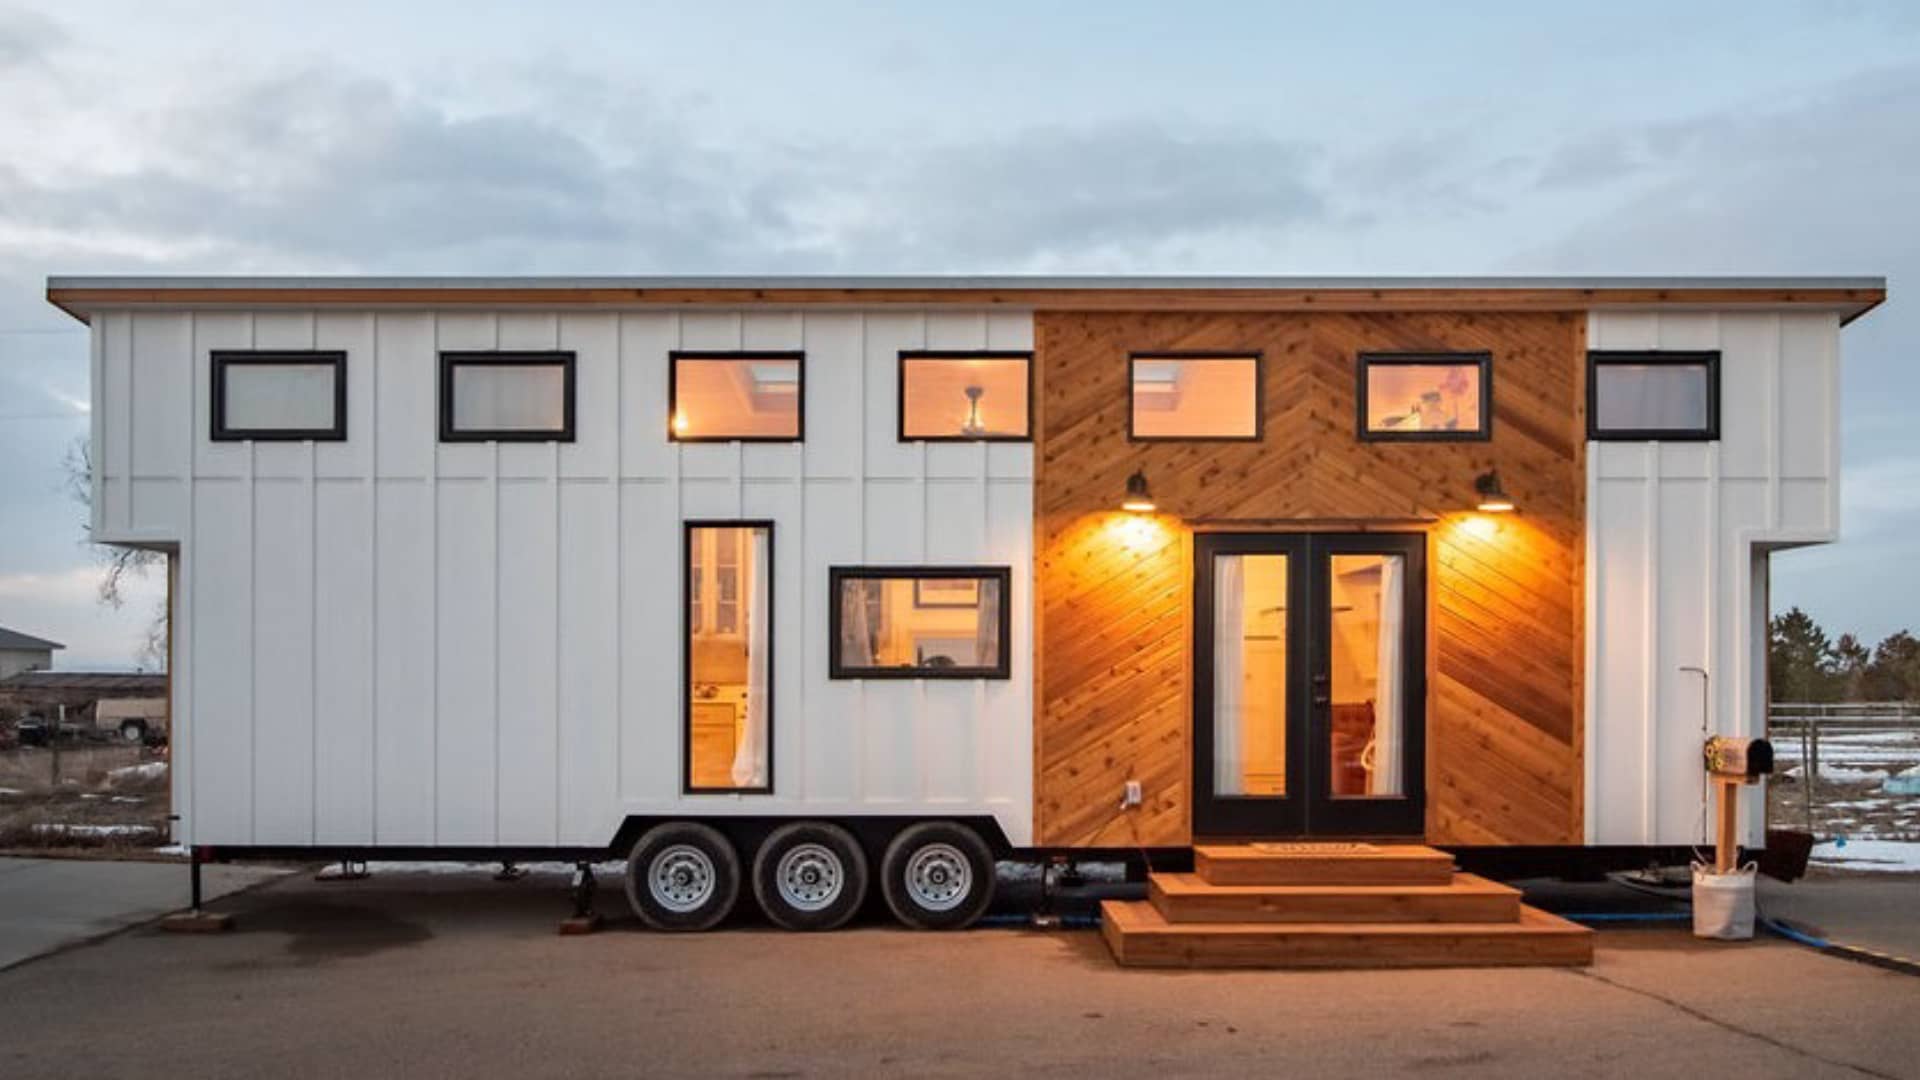 This 51-year-old pays $725 a month to live in a 'luxury tiny home